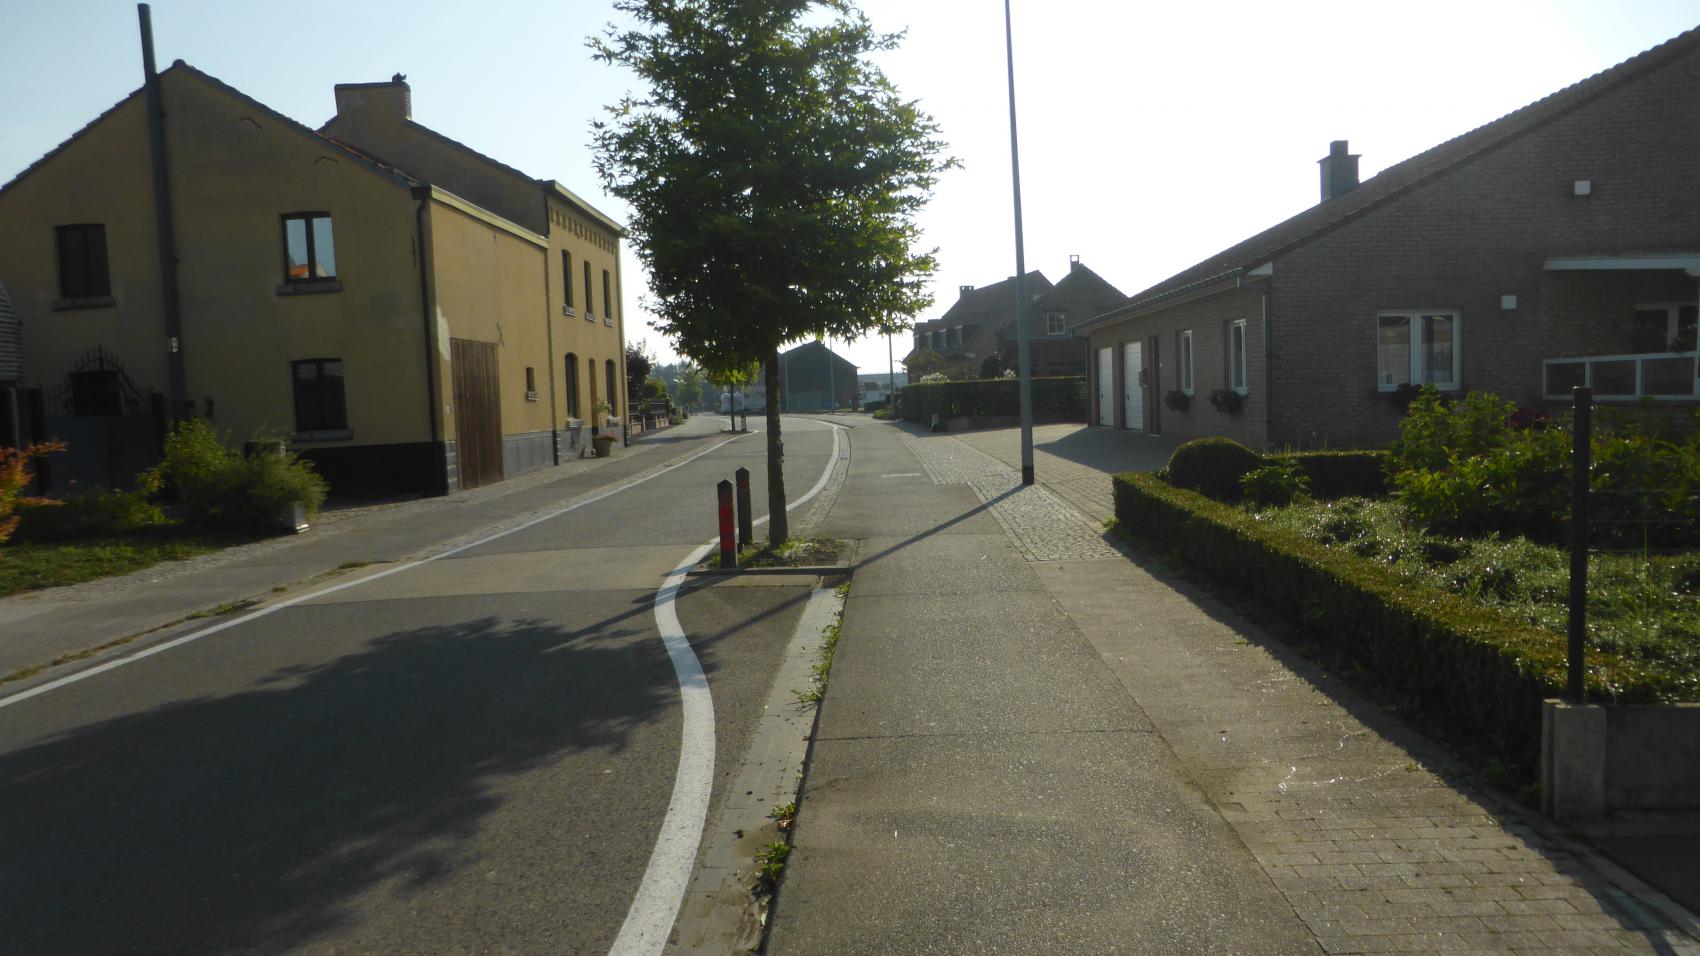 The same location in 2017. Carriageway narrowed, cycle paths continuous and wider, additional section of pavement for pedestrians. There is even space for trees!